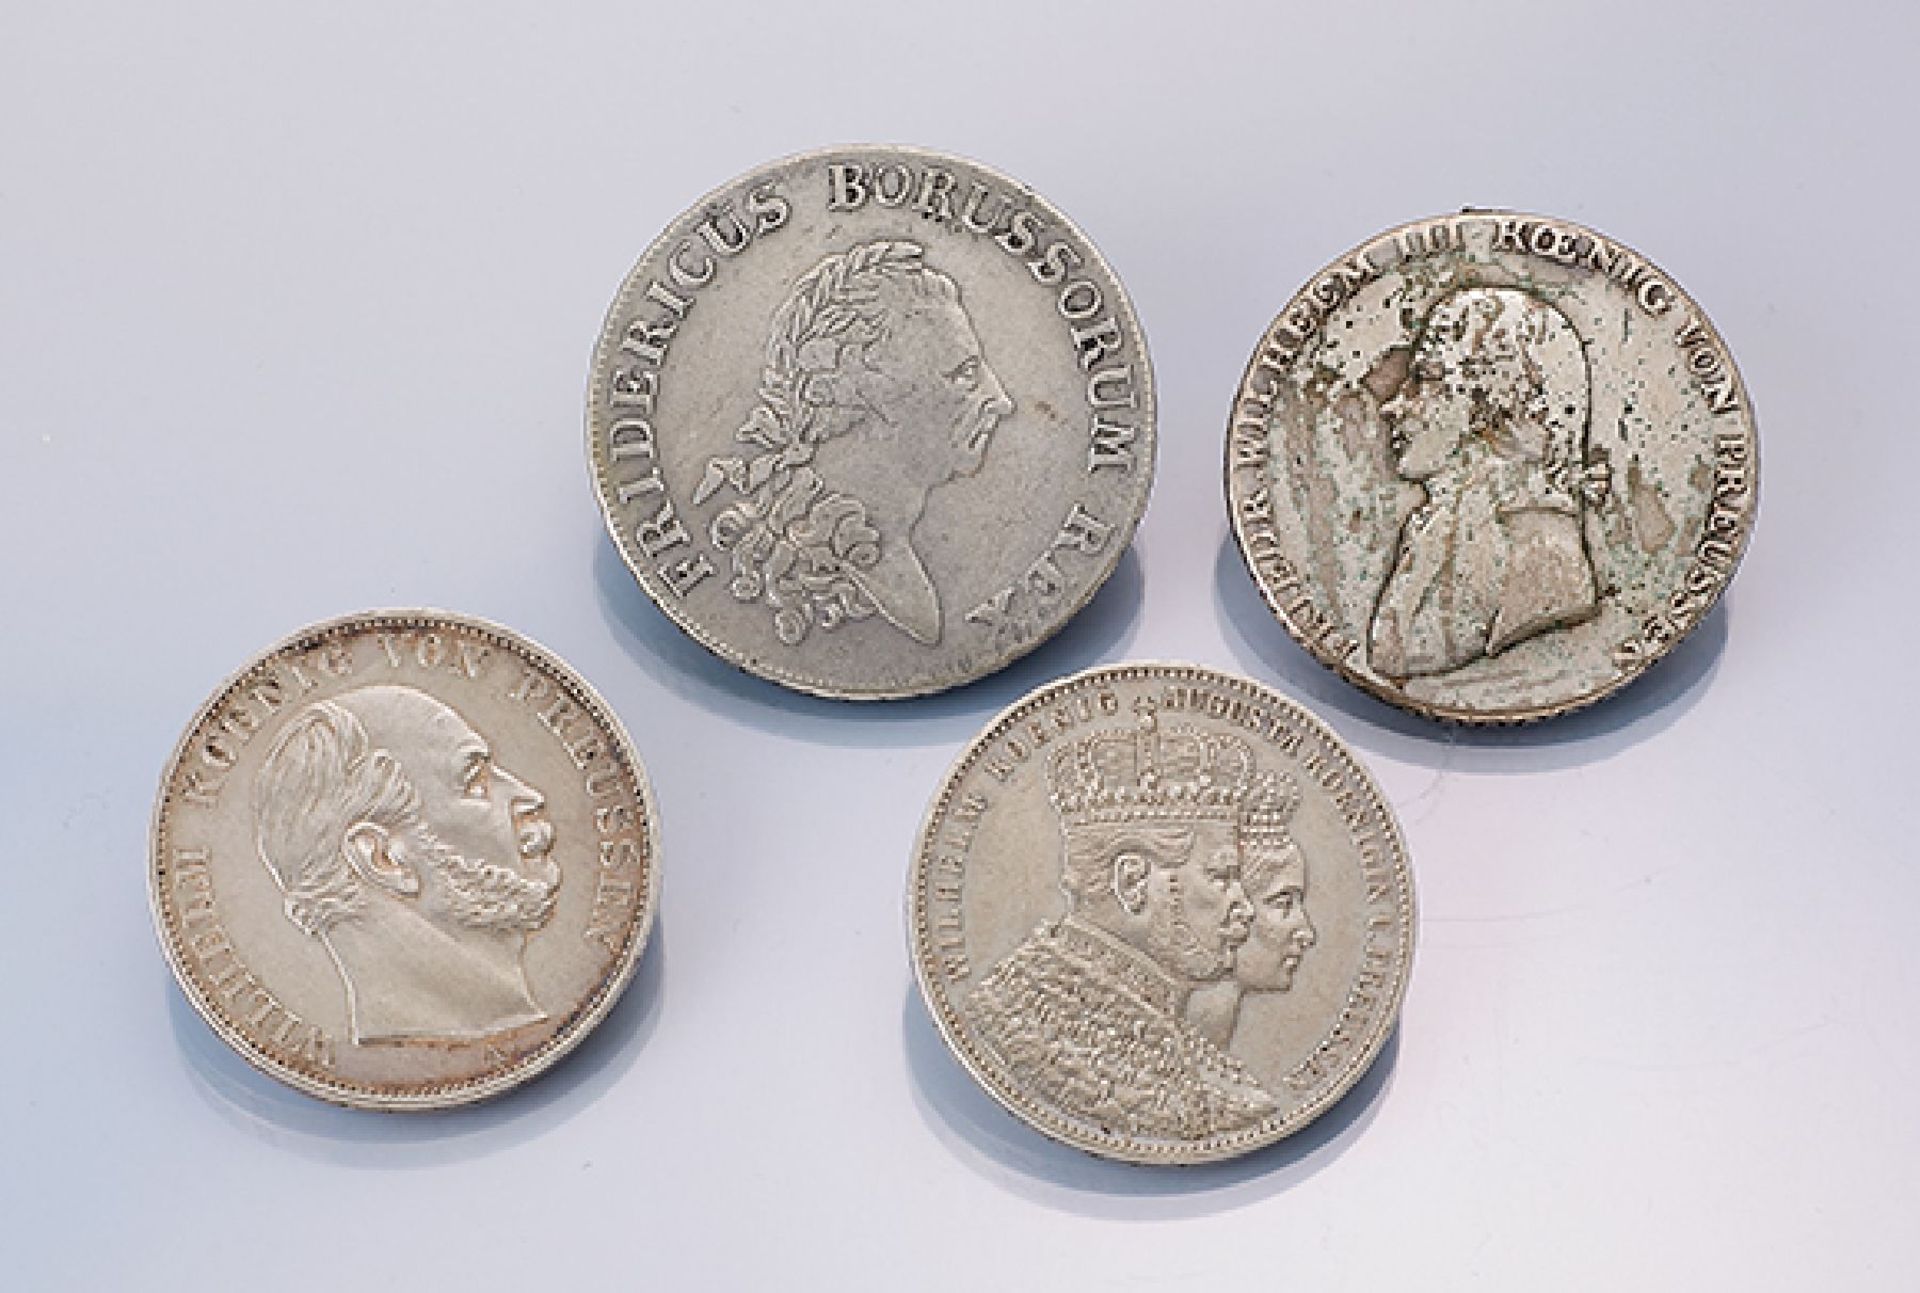 Lot 7 silver coins , Prussia, comprised of: 1 x 1 Reichsthaler, 1777, Fridericus Borussorum Rex, 1 x